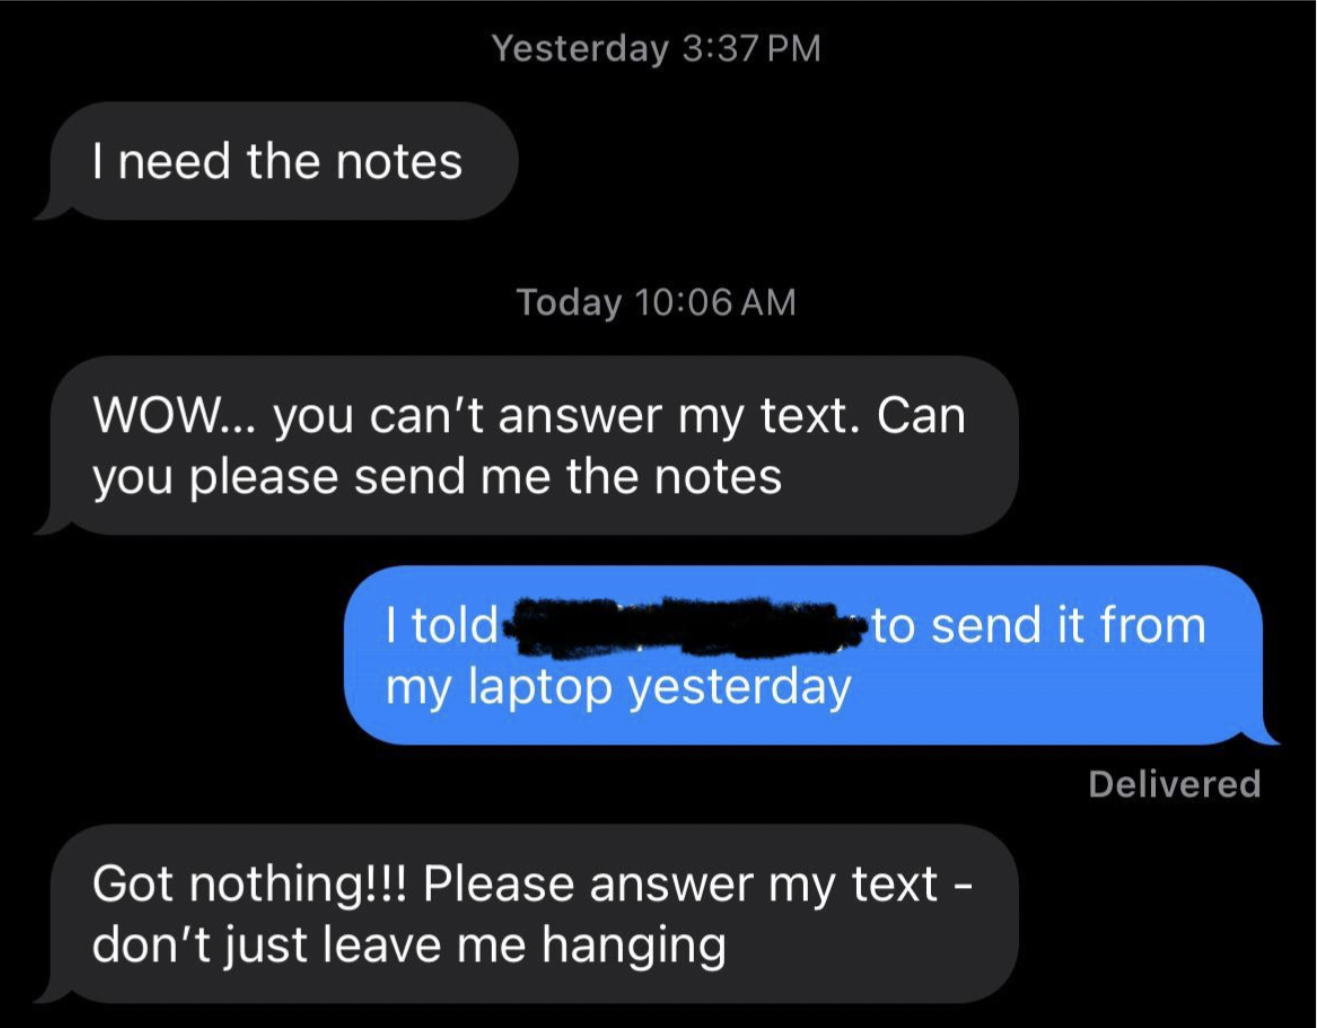 screenshot - I need the notes Yesterday Today Wow... you can't answer my text. Can you please send me the notes I told my laptop yesterday to send it from Got nothing!!! Please answer my text don't just leave me hanging Delivered